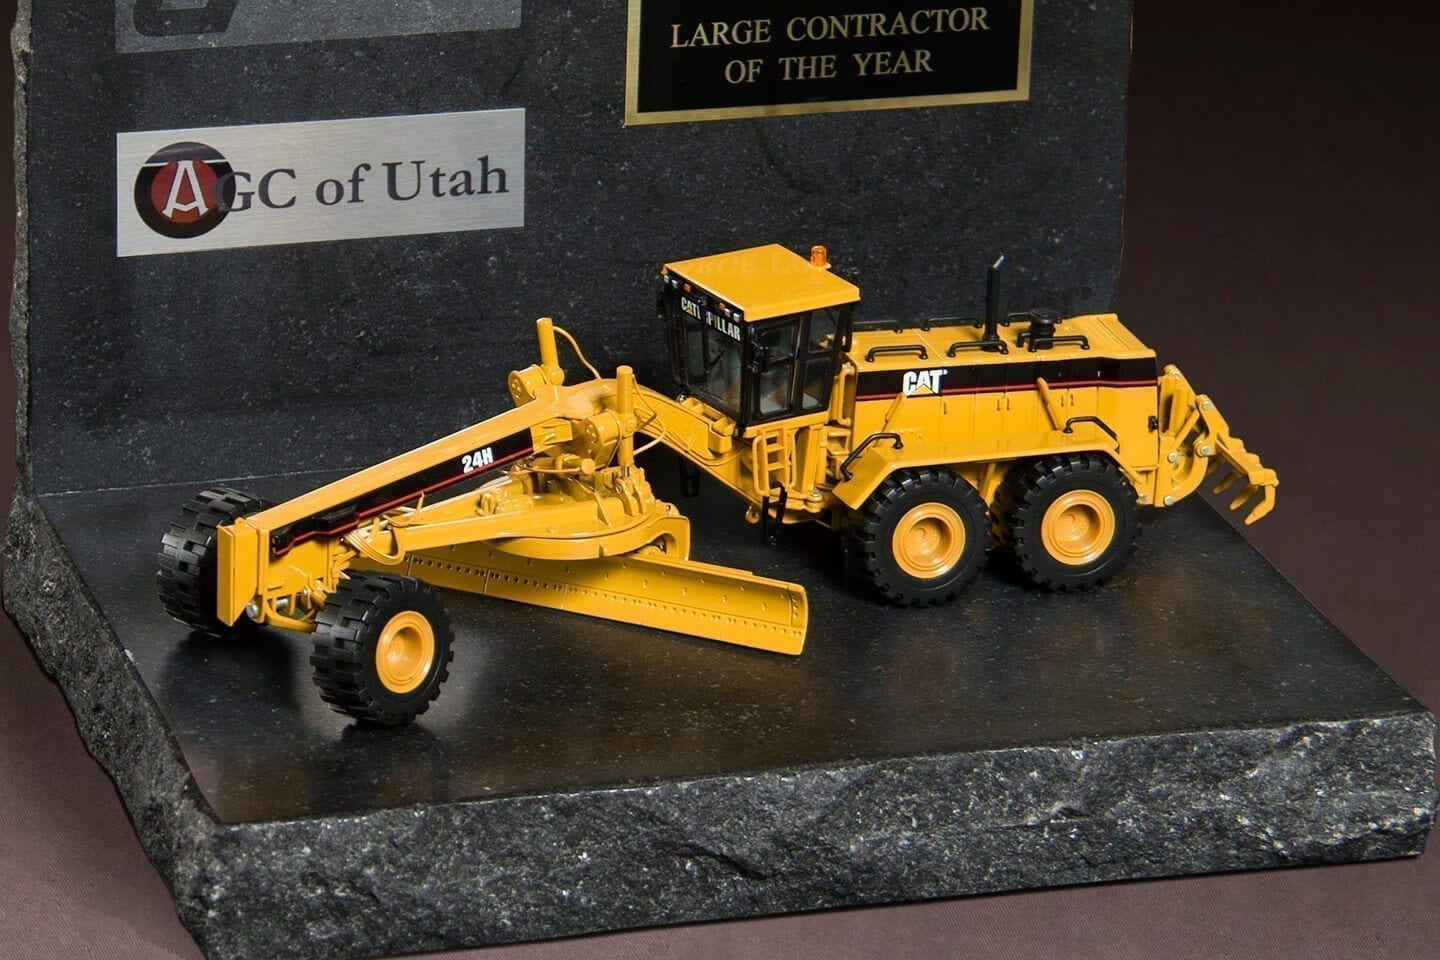 UDOT & AGC Of Utah 2015 Large Contractor Of The Year